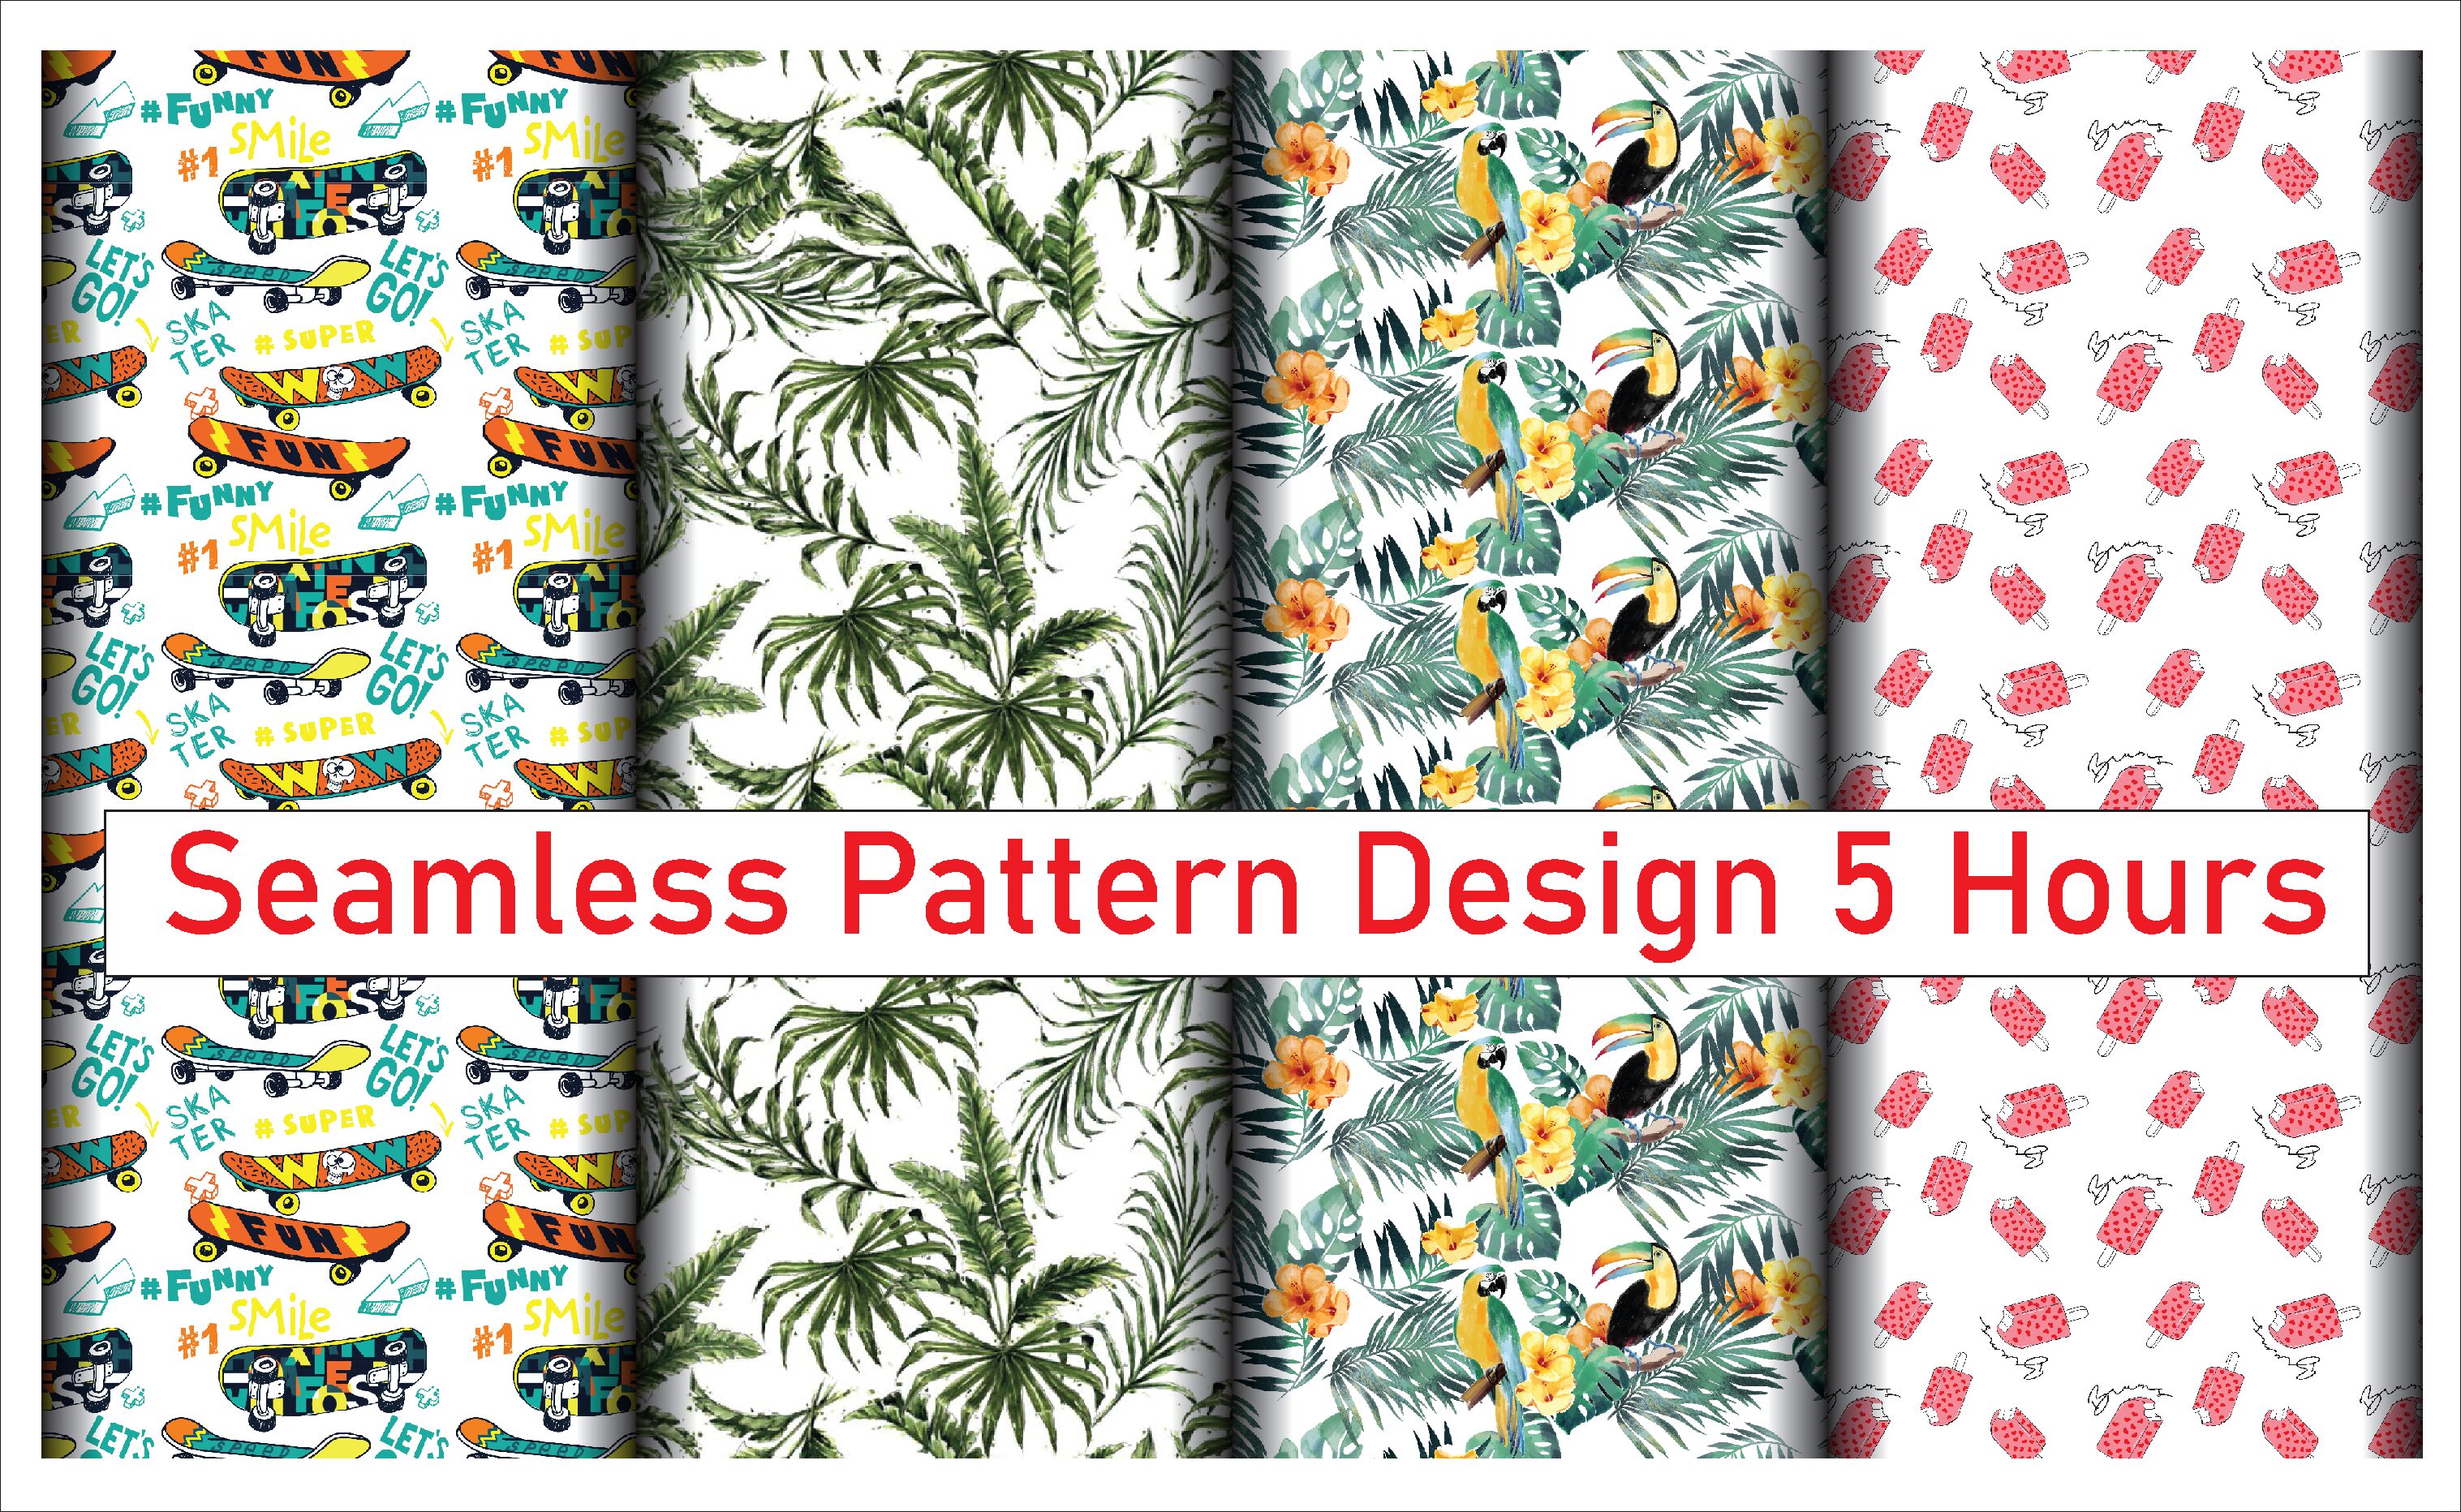 create I will professional aop pattern for textile seamless prints pattern design, FiverrBox